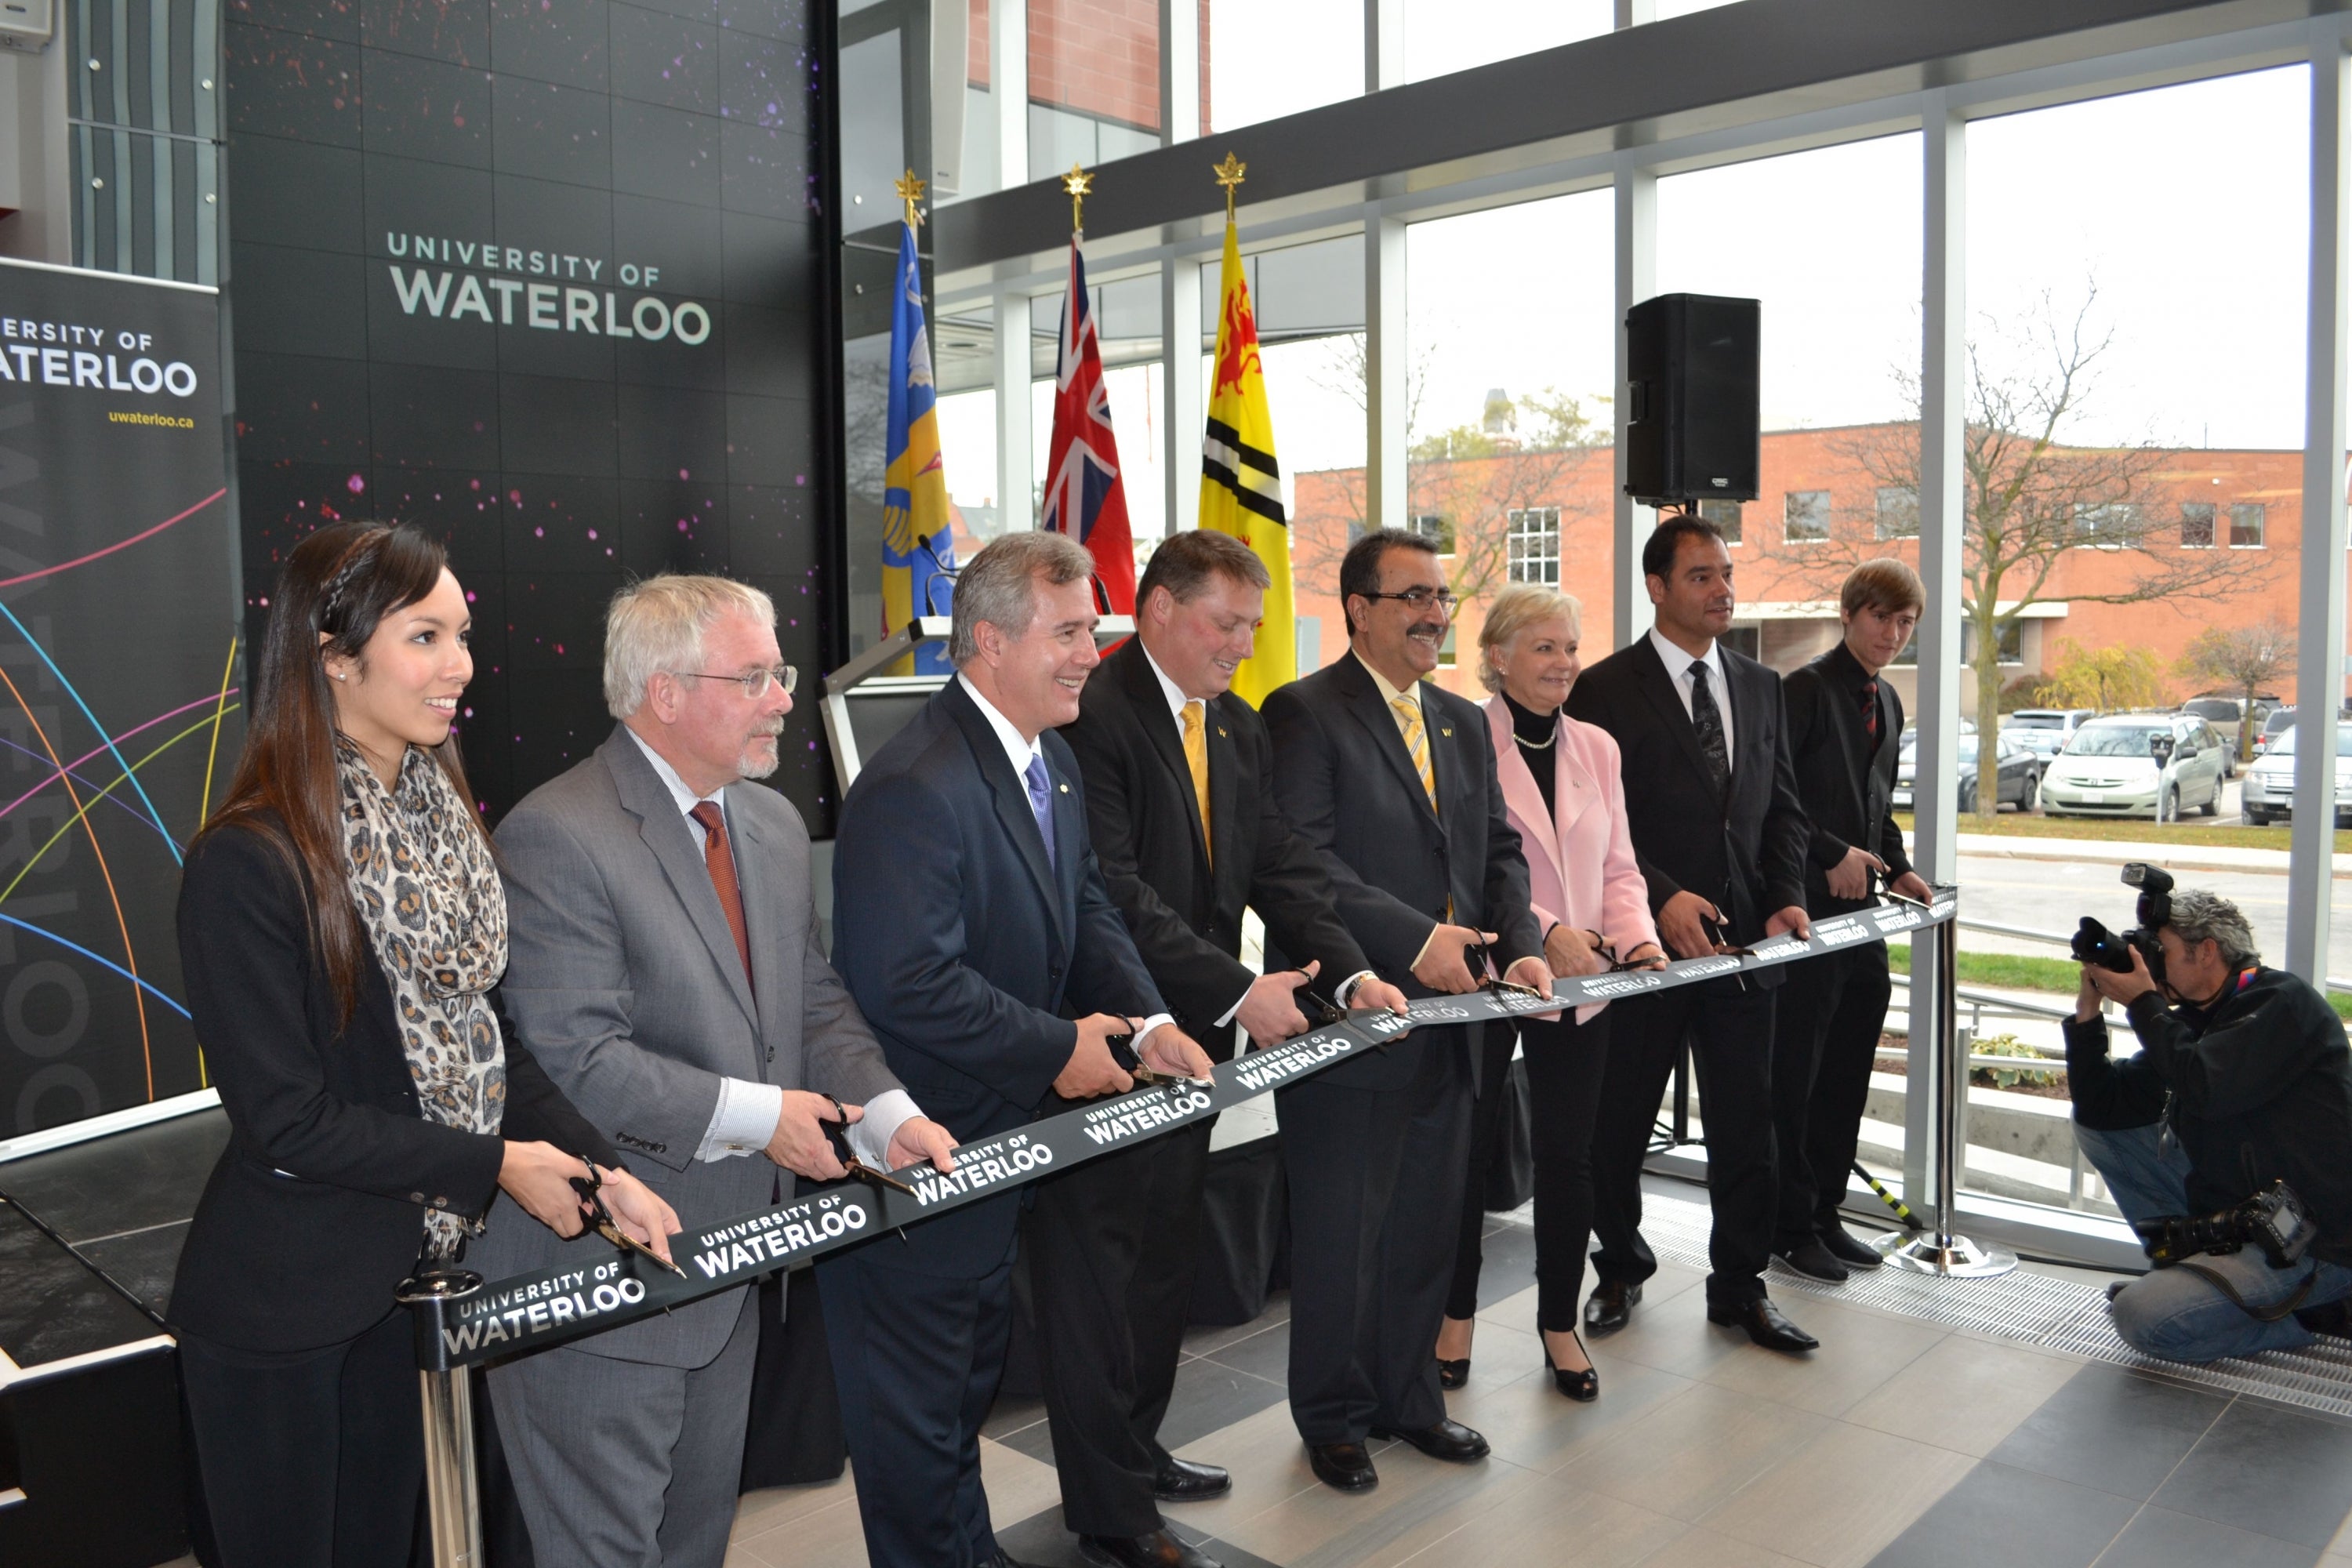 President Hamdullahpur and community leaders open Stratford Campus.